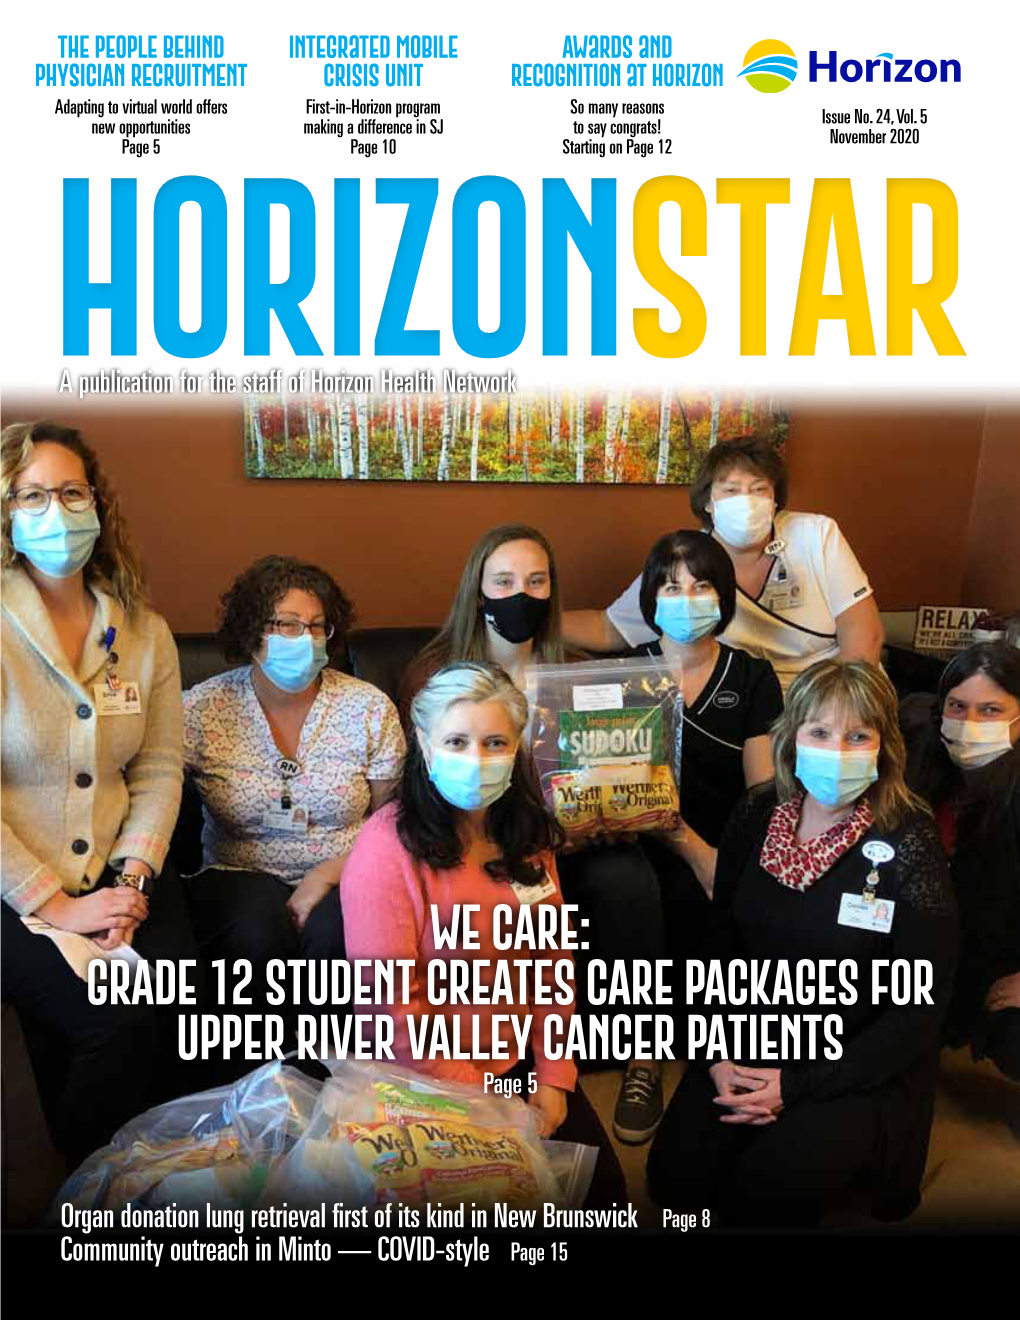 Grade 12 Student Creates Care Packages for Upper River Valley Cancer Patients Page 5